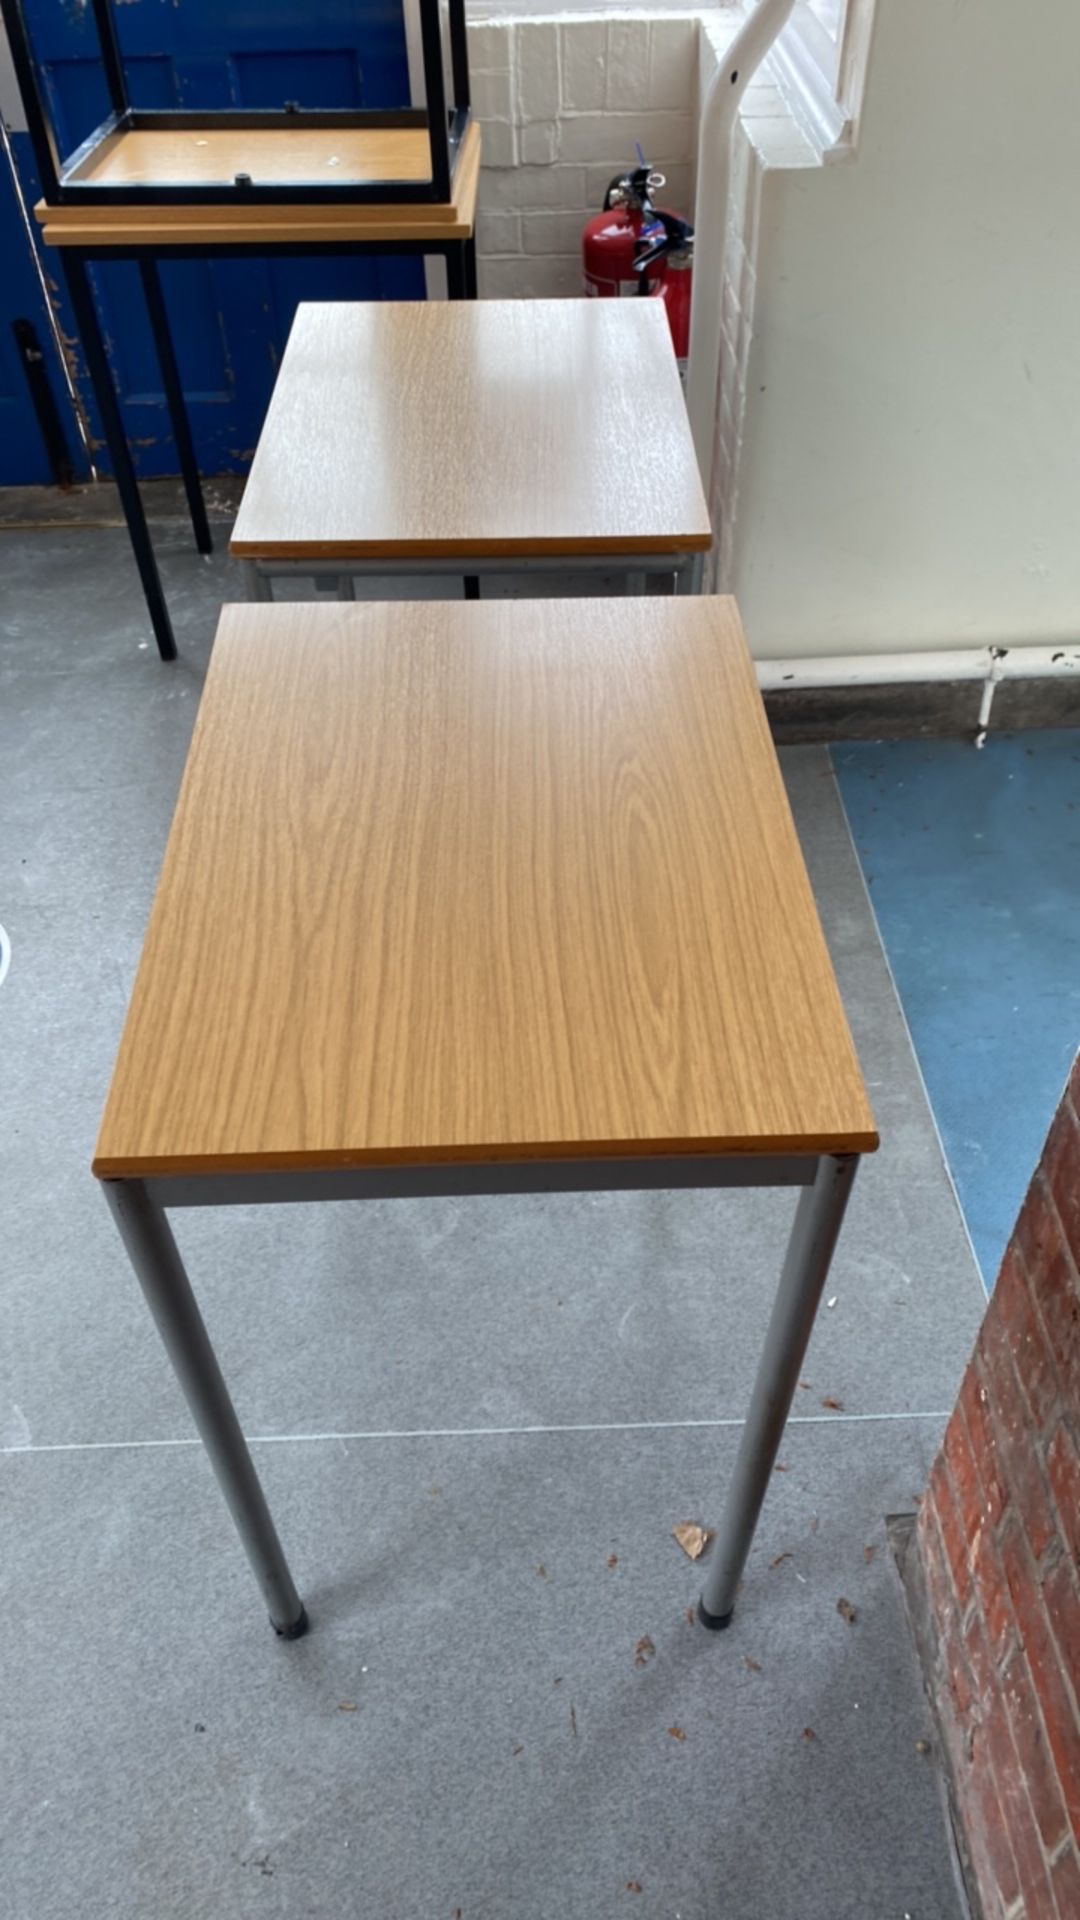 Set of 4 Silver Framed Exam Tables - Image 4 of 6